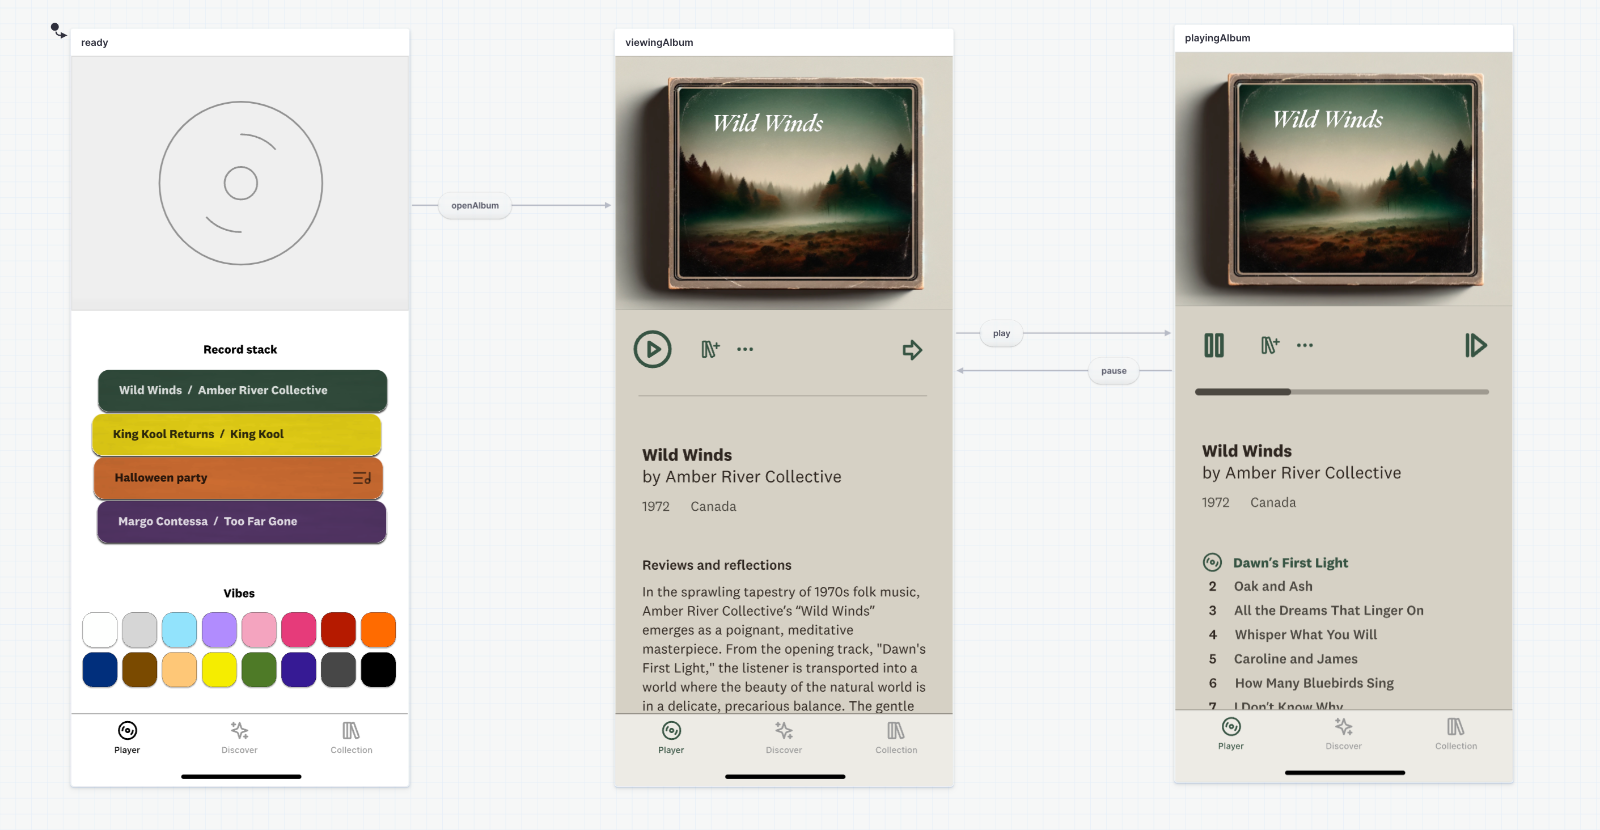 Three Figma frames displayed in three Stately states for a music player. The ready state shows a record stack app view, following the openAlbum event, the viewingAlbum state shows the Wild Winds album coverart and information, from the viewingAlbum state, there’s a play event that takes you to the playingAlbum state which shows the album list for the Wild Winds album and a player progress bar. The pause event returns from the playingAlbum state to the viewingAlbum state.